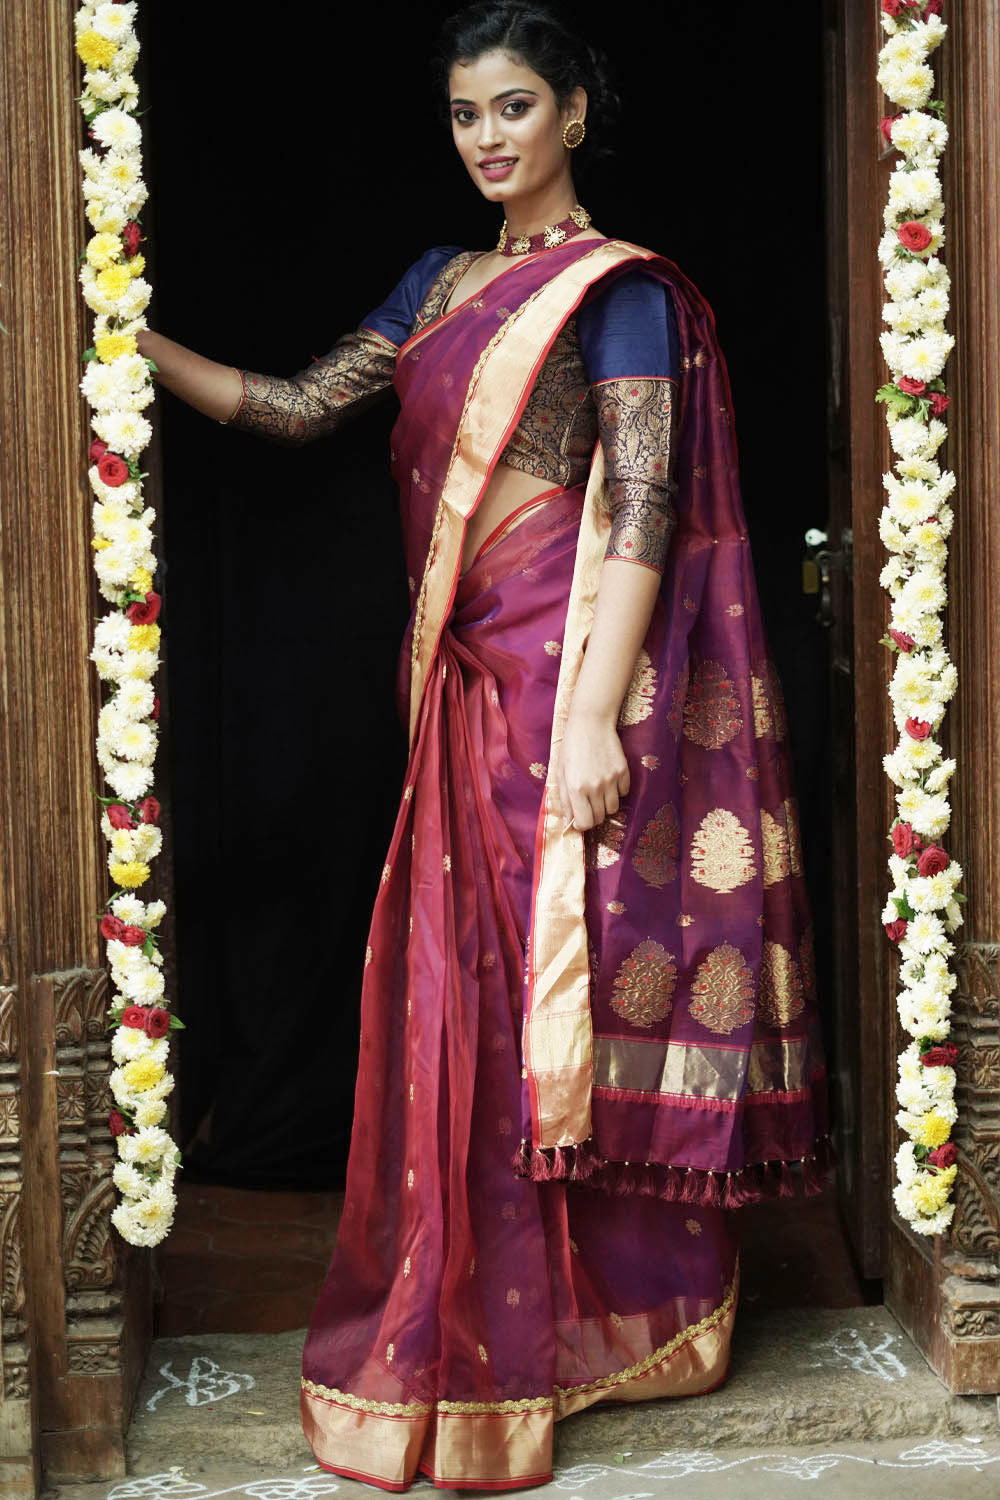 Plum coloured pure chanderi saree with gold zari buttis and gold tissue border with gold lace.